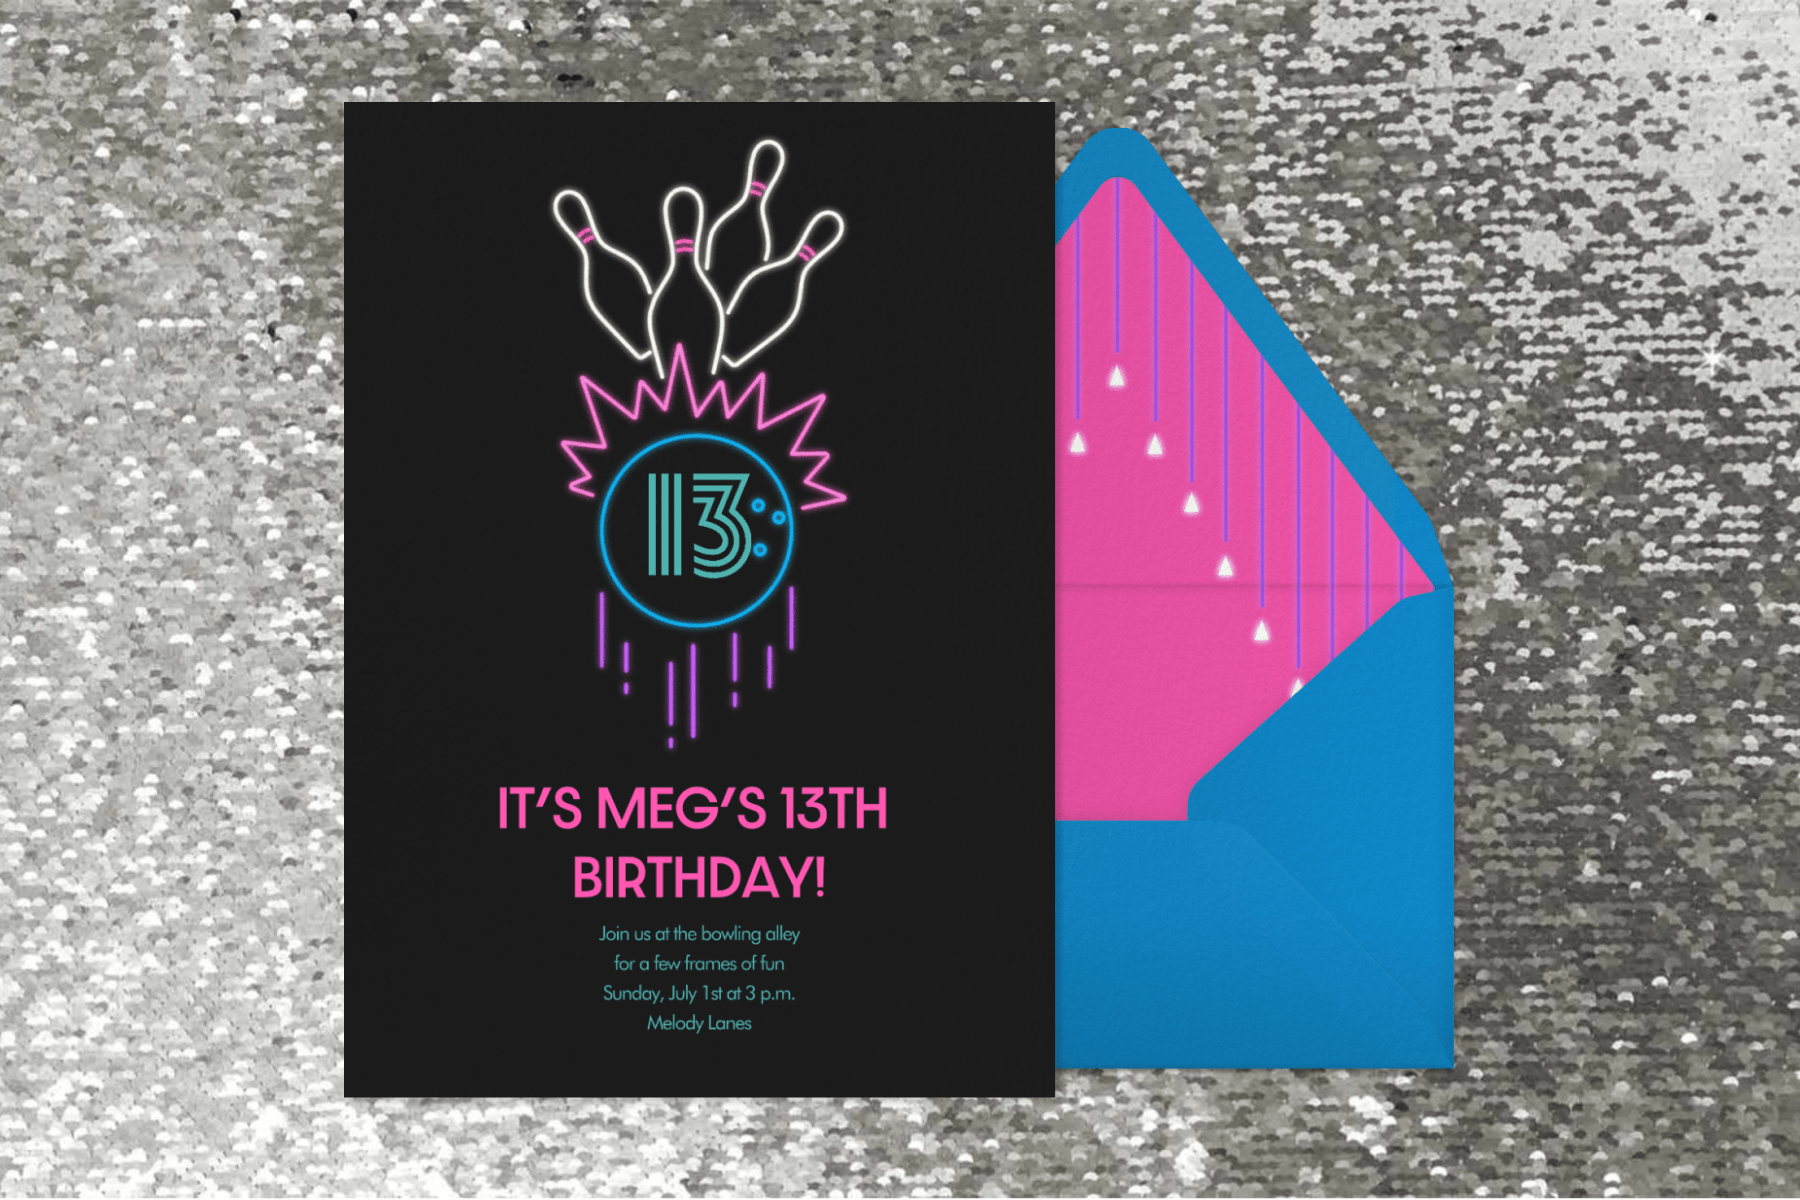 A black invitation with a colorful neon line illustration of a bowling ball hitting four pins next to a blue envelope with hot pink liner.